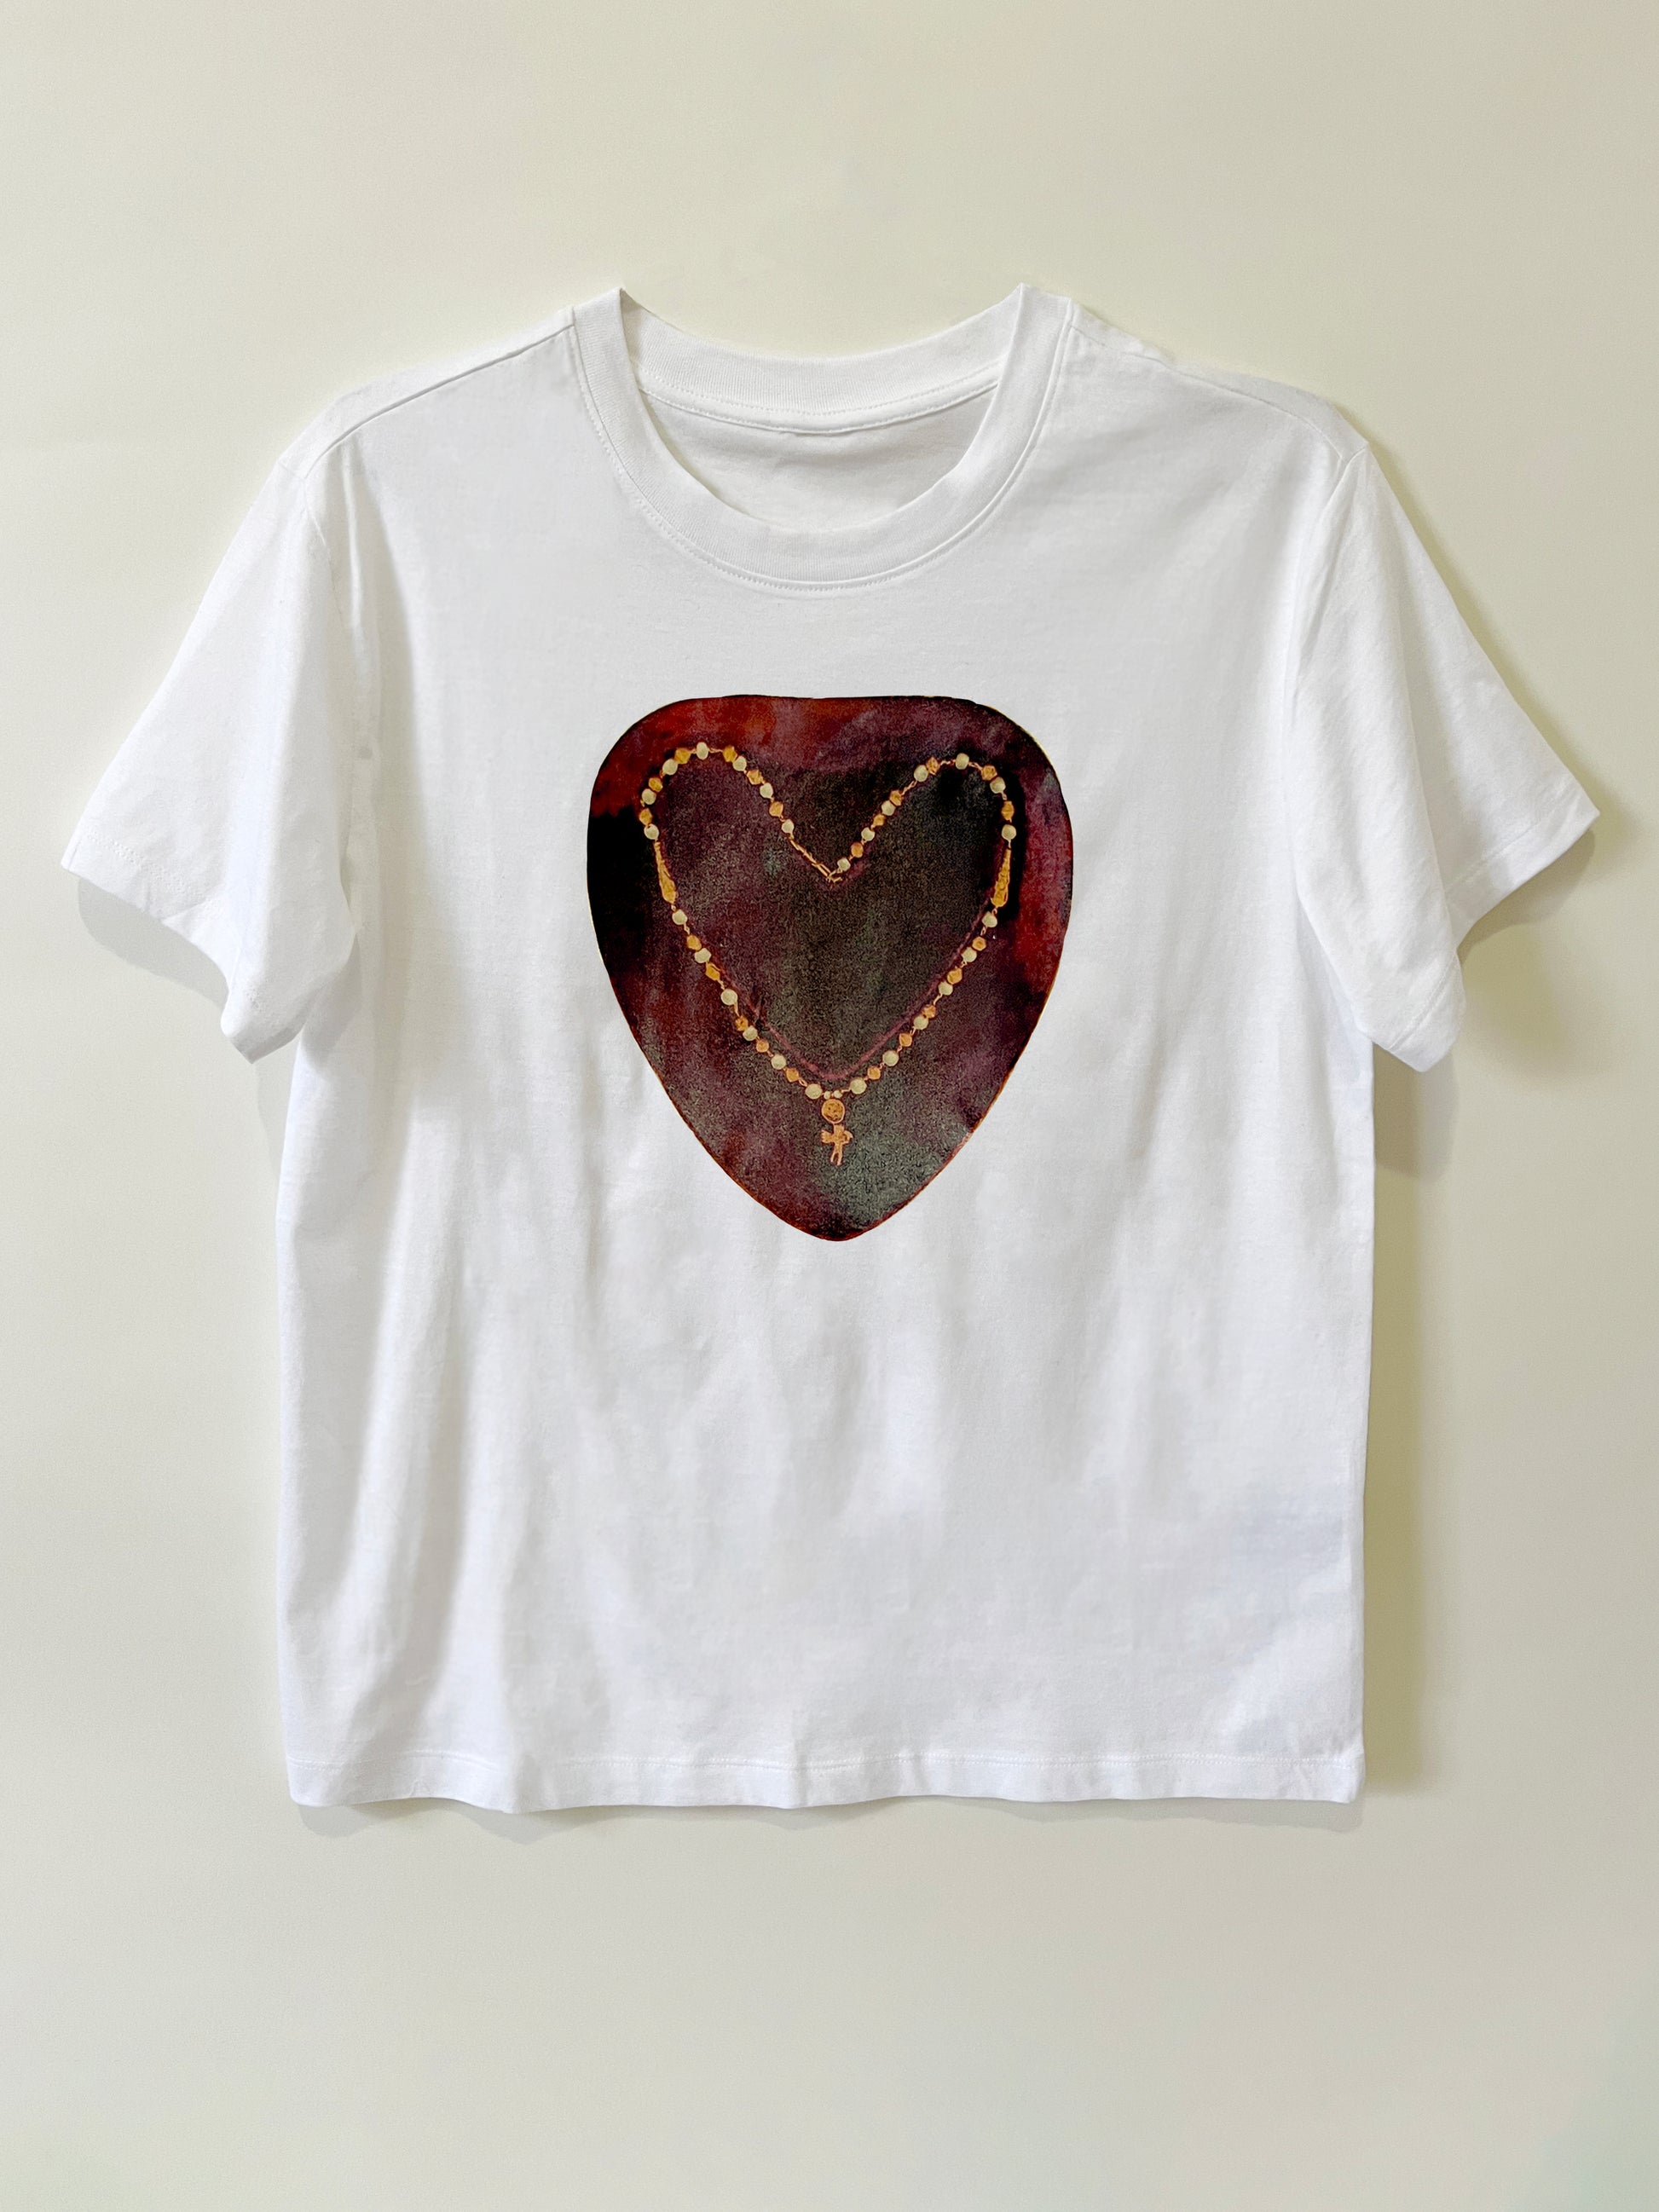 Heartbreaker Tee by CLARK! A white graphic tee featuring a photo-collage of a necklace with a baby cupid charm in the shape of a heart on painterly crimson ground, this tee is straight-cut. 